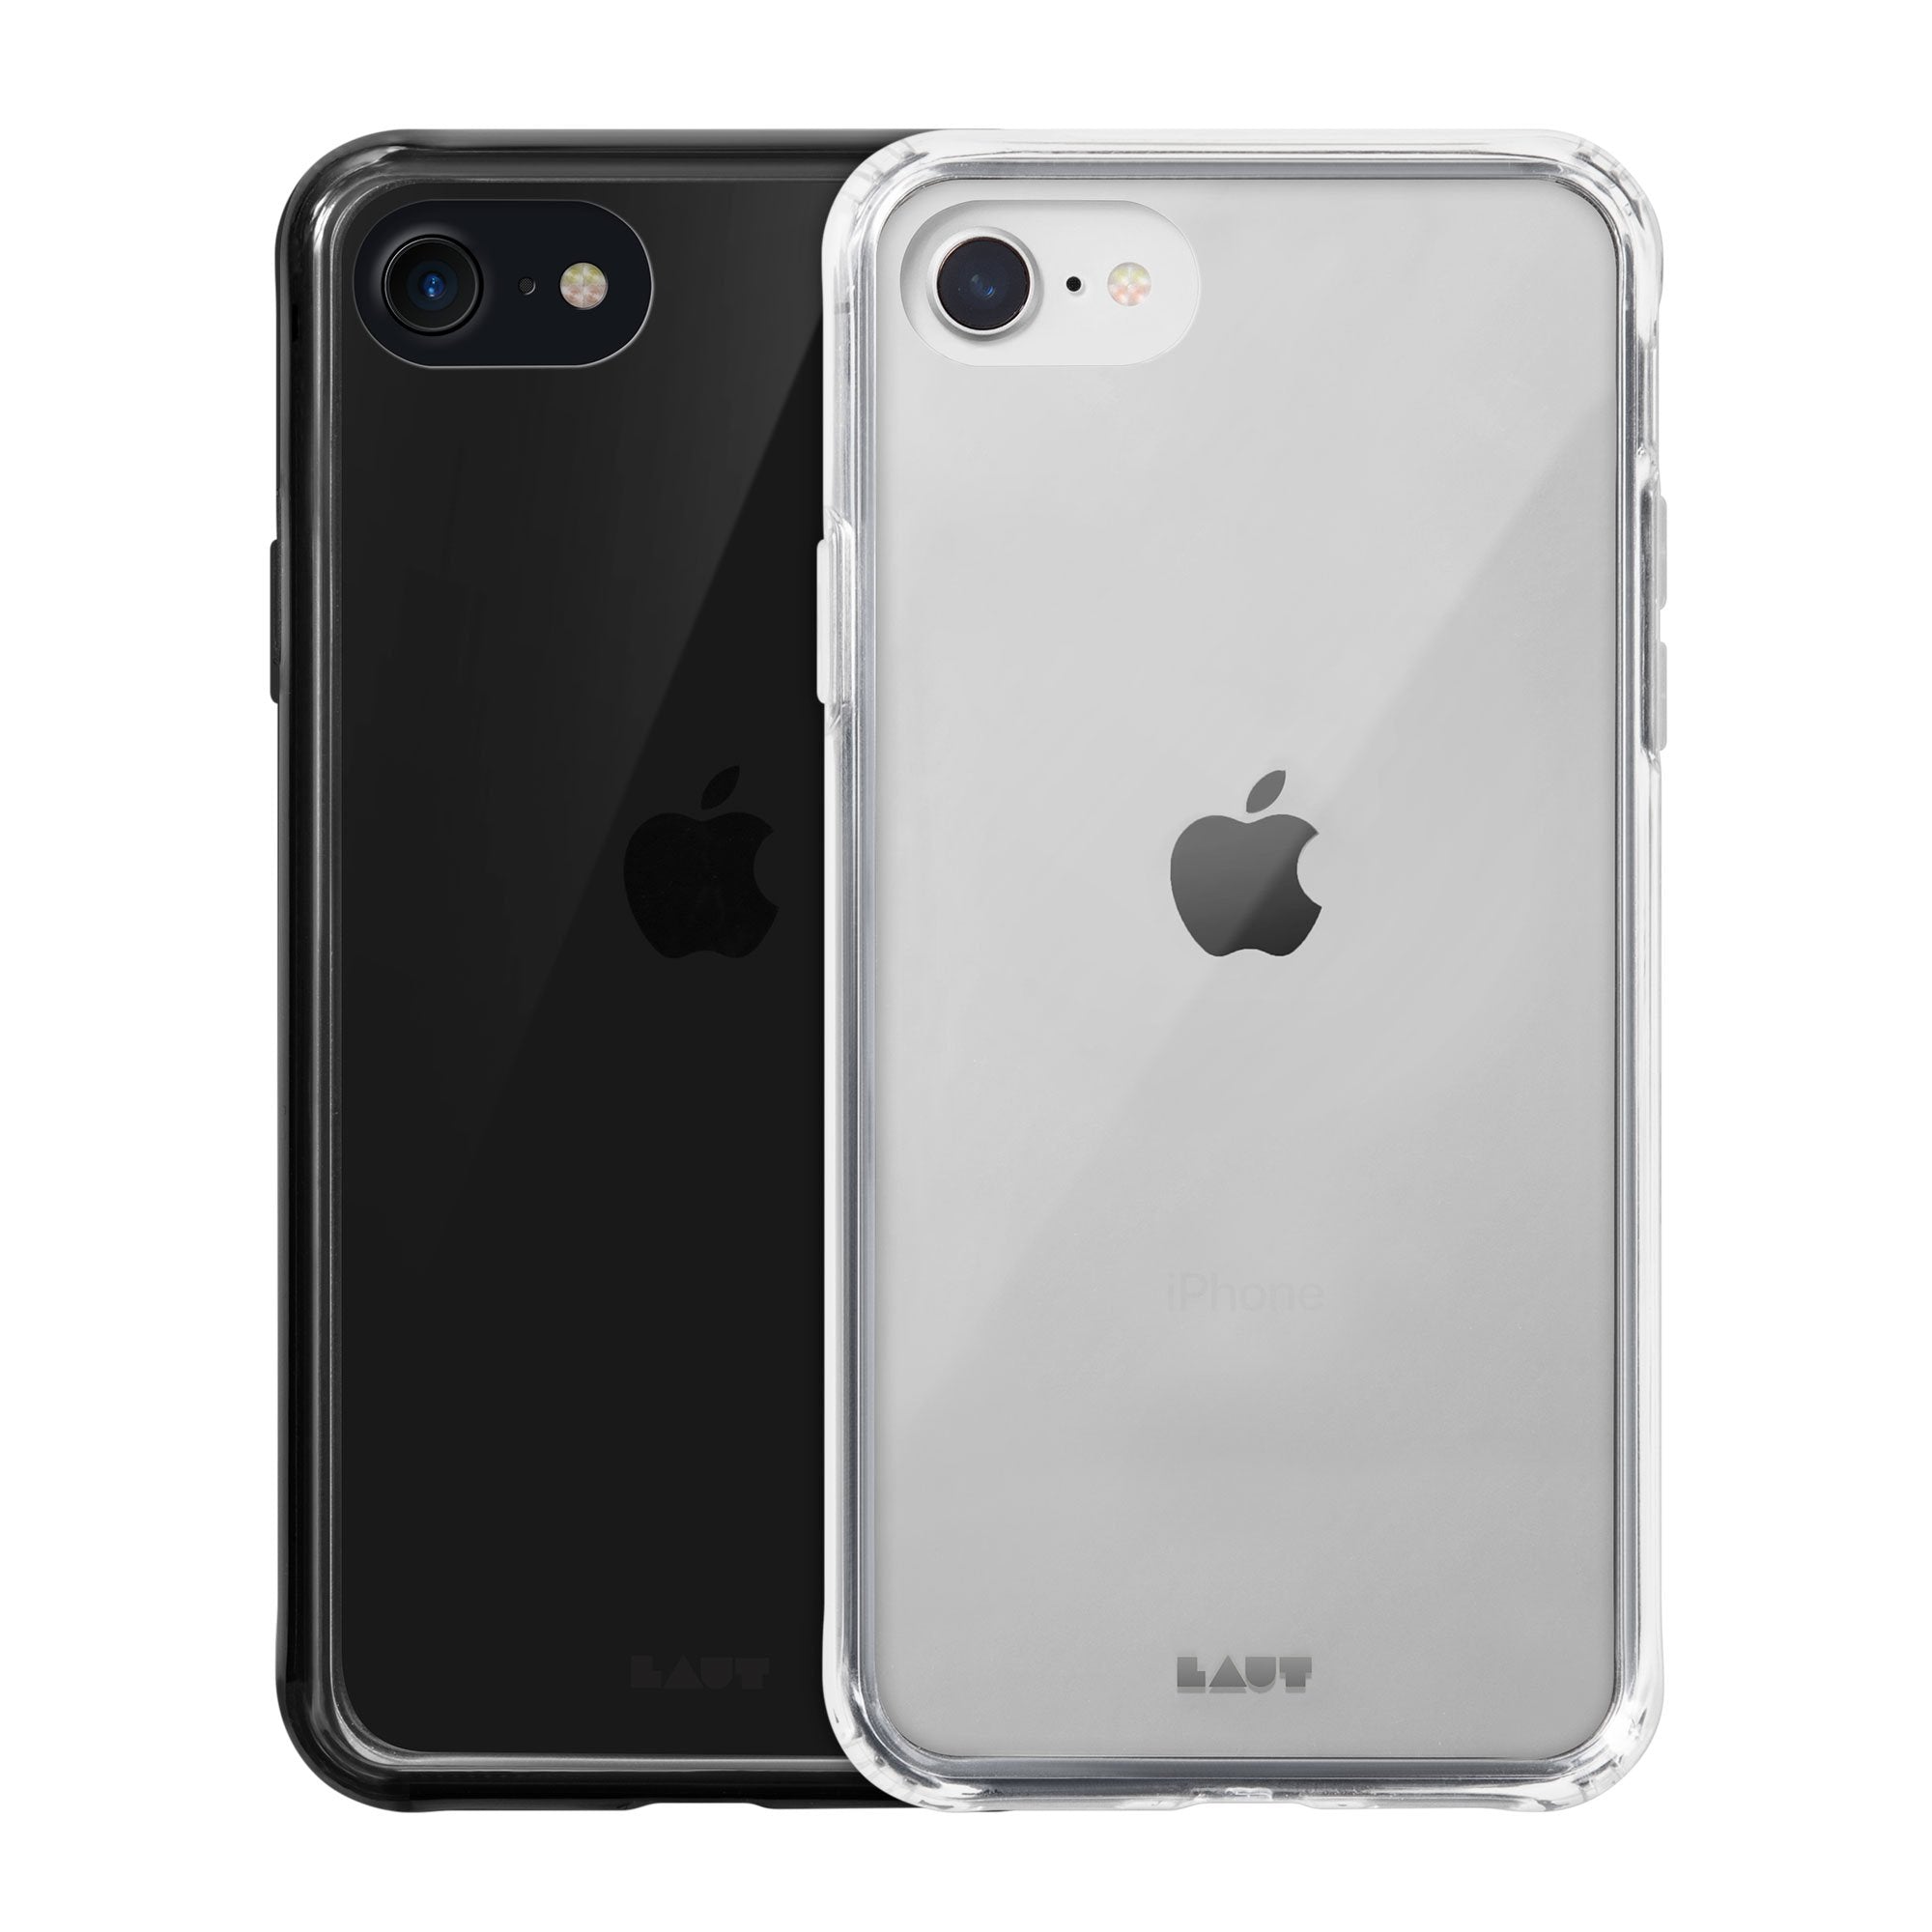 Crystal-X case for iPhone SE 2020 / iPhone 8/7 - LAUT Japan